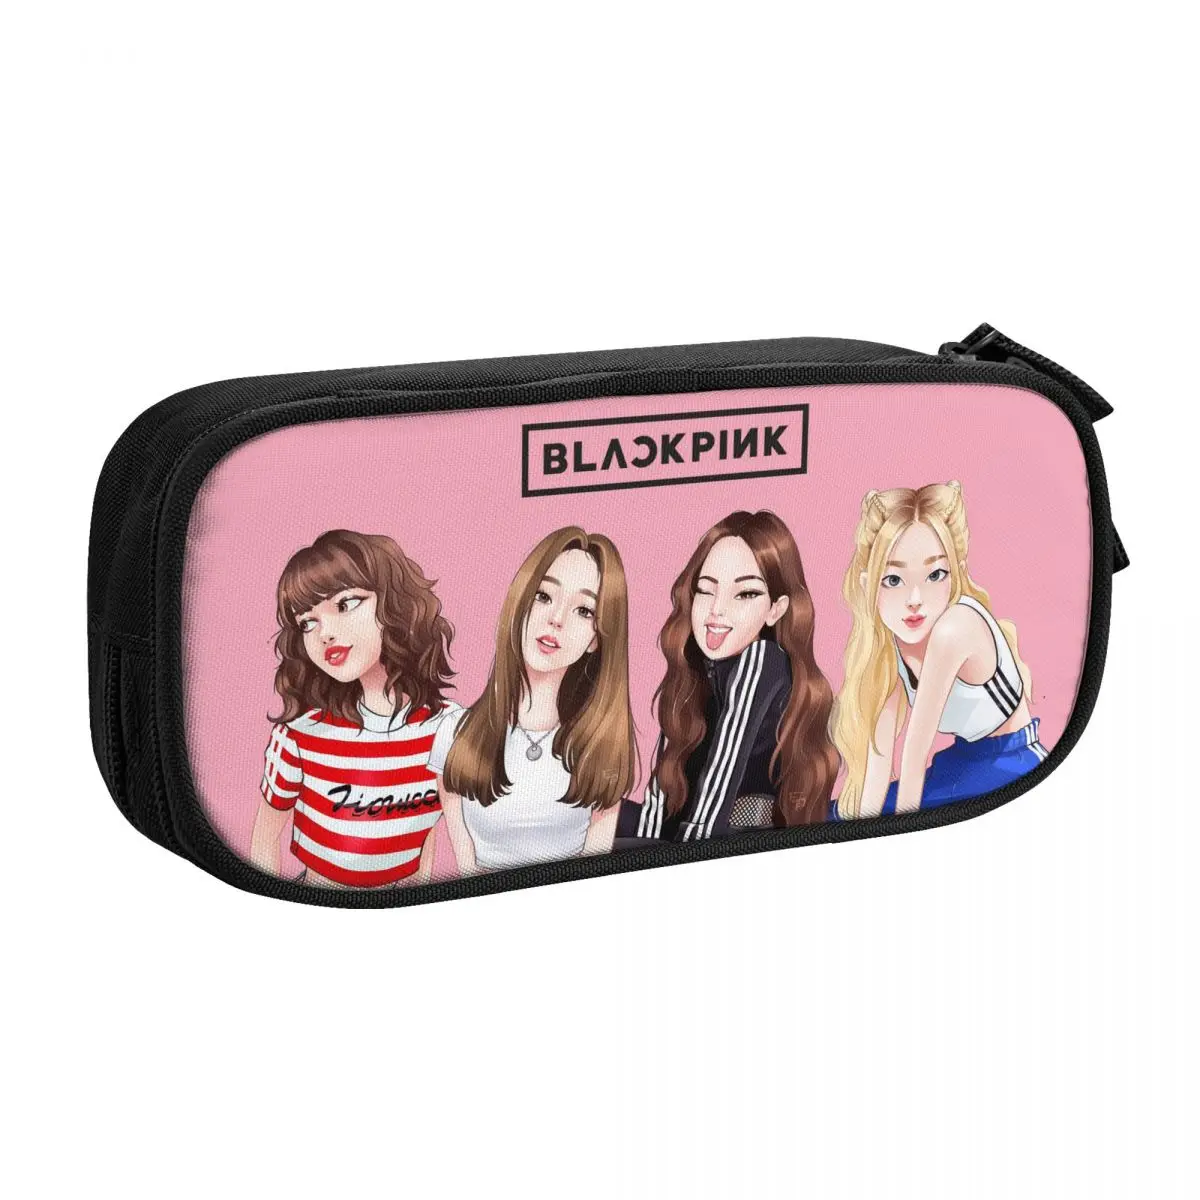 

Kpop Jennie Black-Pink Pencil Pen Case Stationery Bag Pouch Holder Box Organizer for Teens Girls Adults Student